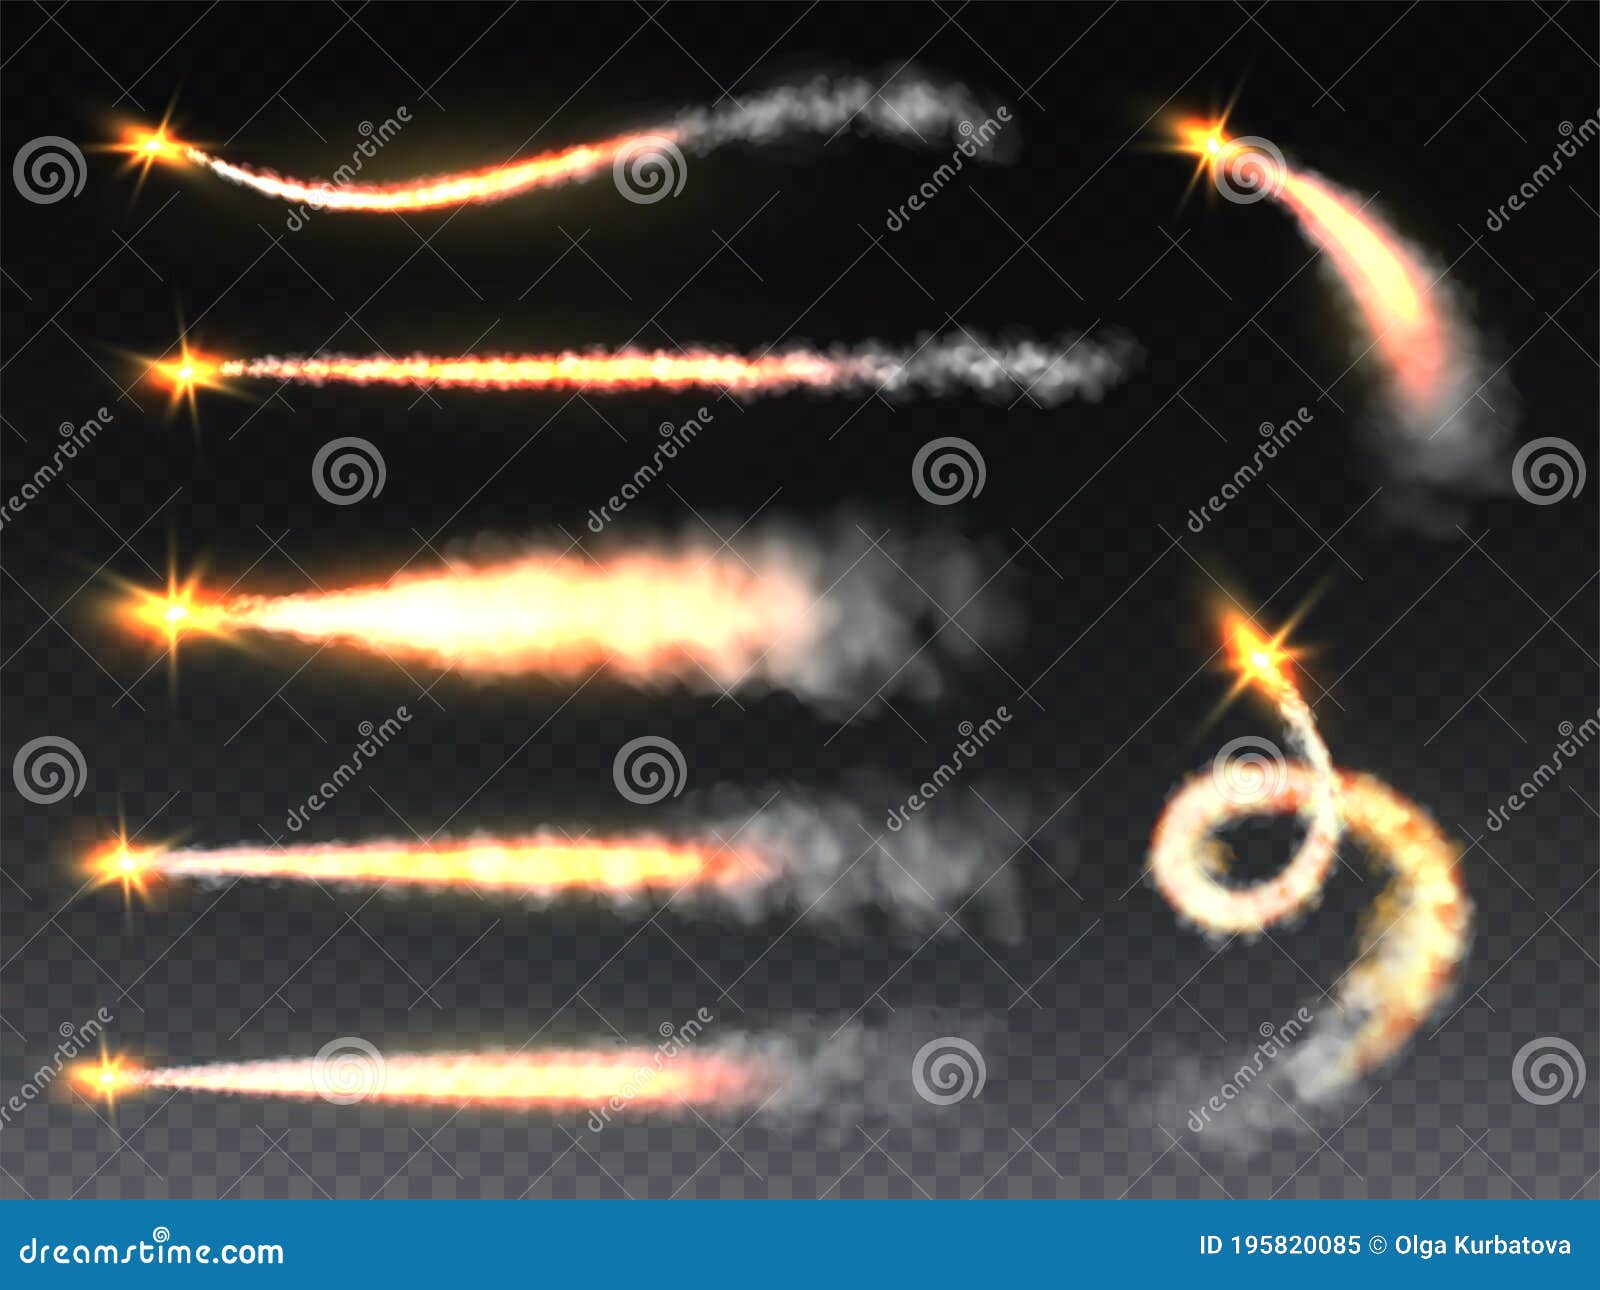 60+ Jet Pack Flame Stock Illustrations, Royalty-Free Vector